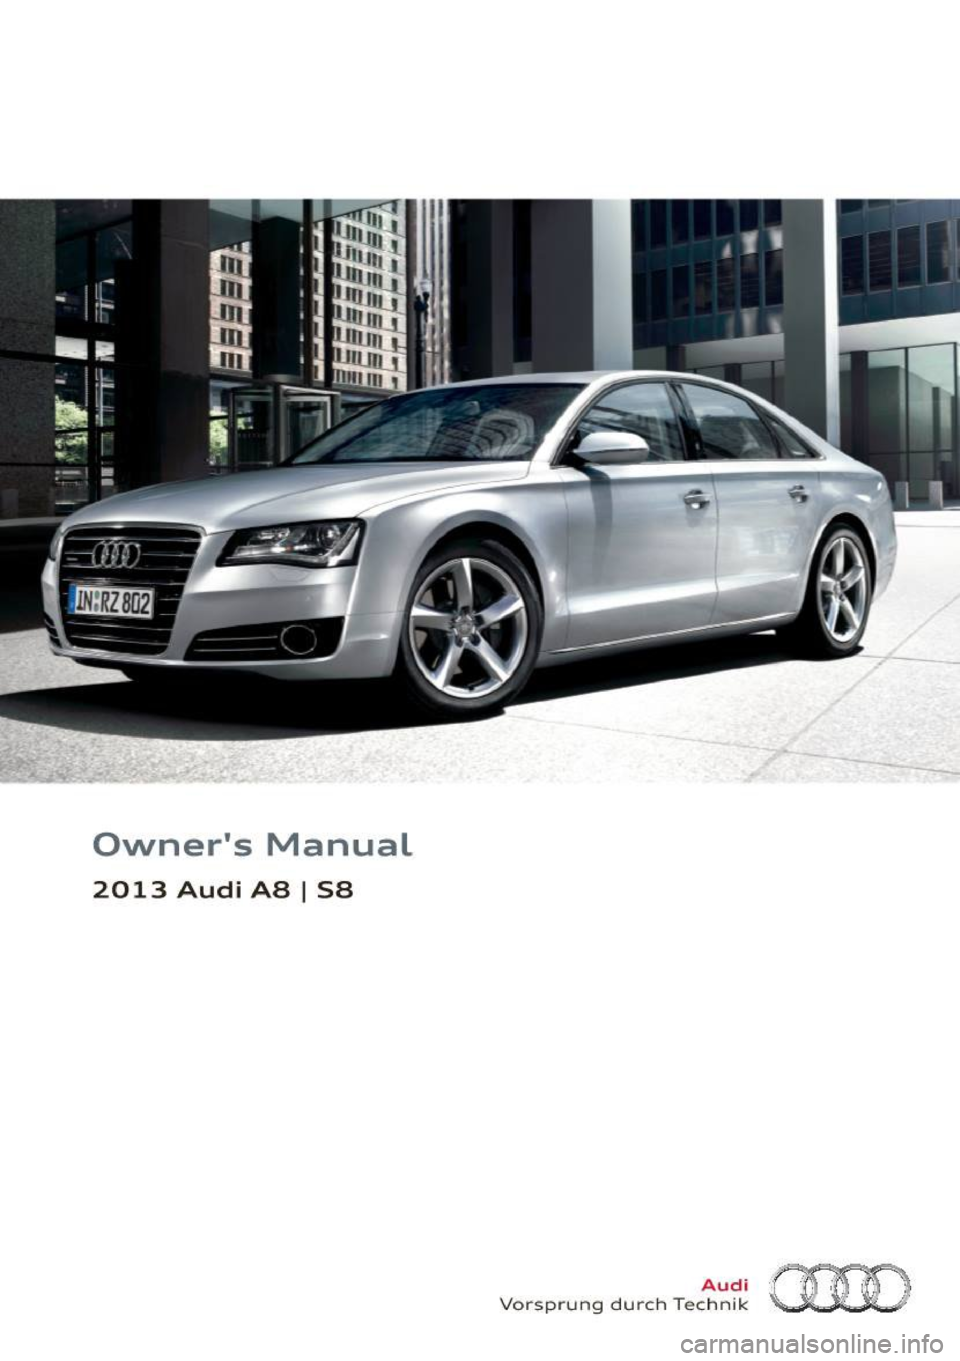 AUDI S8 2013  Owners Manual Owners  Manual 
2013  Audi  AS I S8 
Vorsp rung  du rch  Tec~~f~ am  